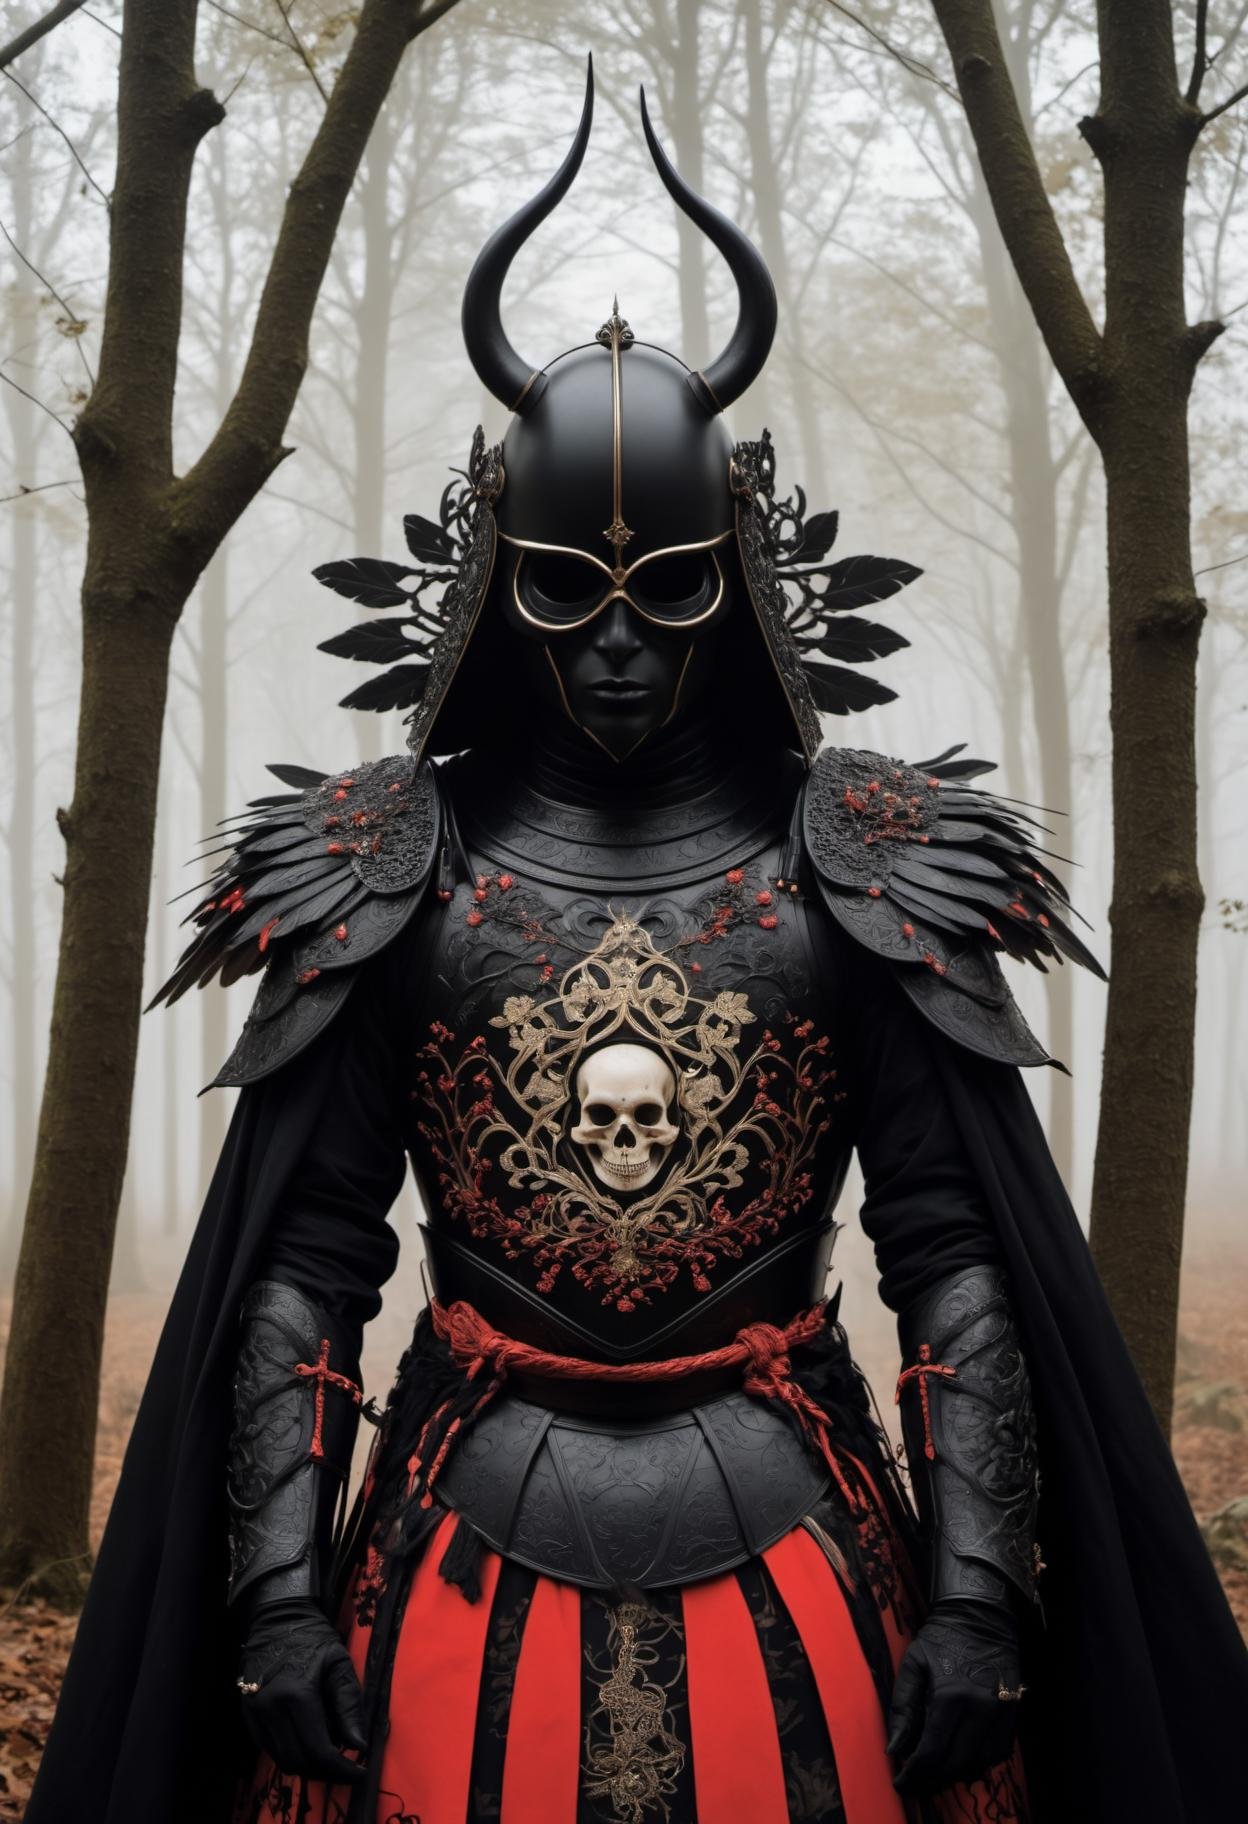 ( 8k, gradient art by Harry Clarke Hayv Kahraman ), (1man:1.3), (night),   body portrait, a menacing fully armored black samurai, (intricately filigreed black yoroi, scroll worked ebony armor,  full skull styled horned helm, skull face guard:1.3), (black and red symmetrical feathered wings:1.2), in the haunted dark forest, (twisted gnarled trees, ghostly swirling energies:1.3),